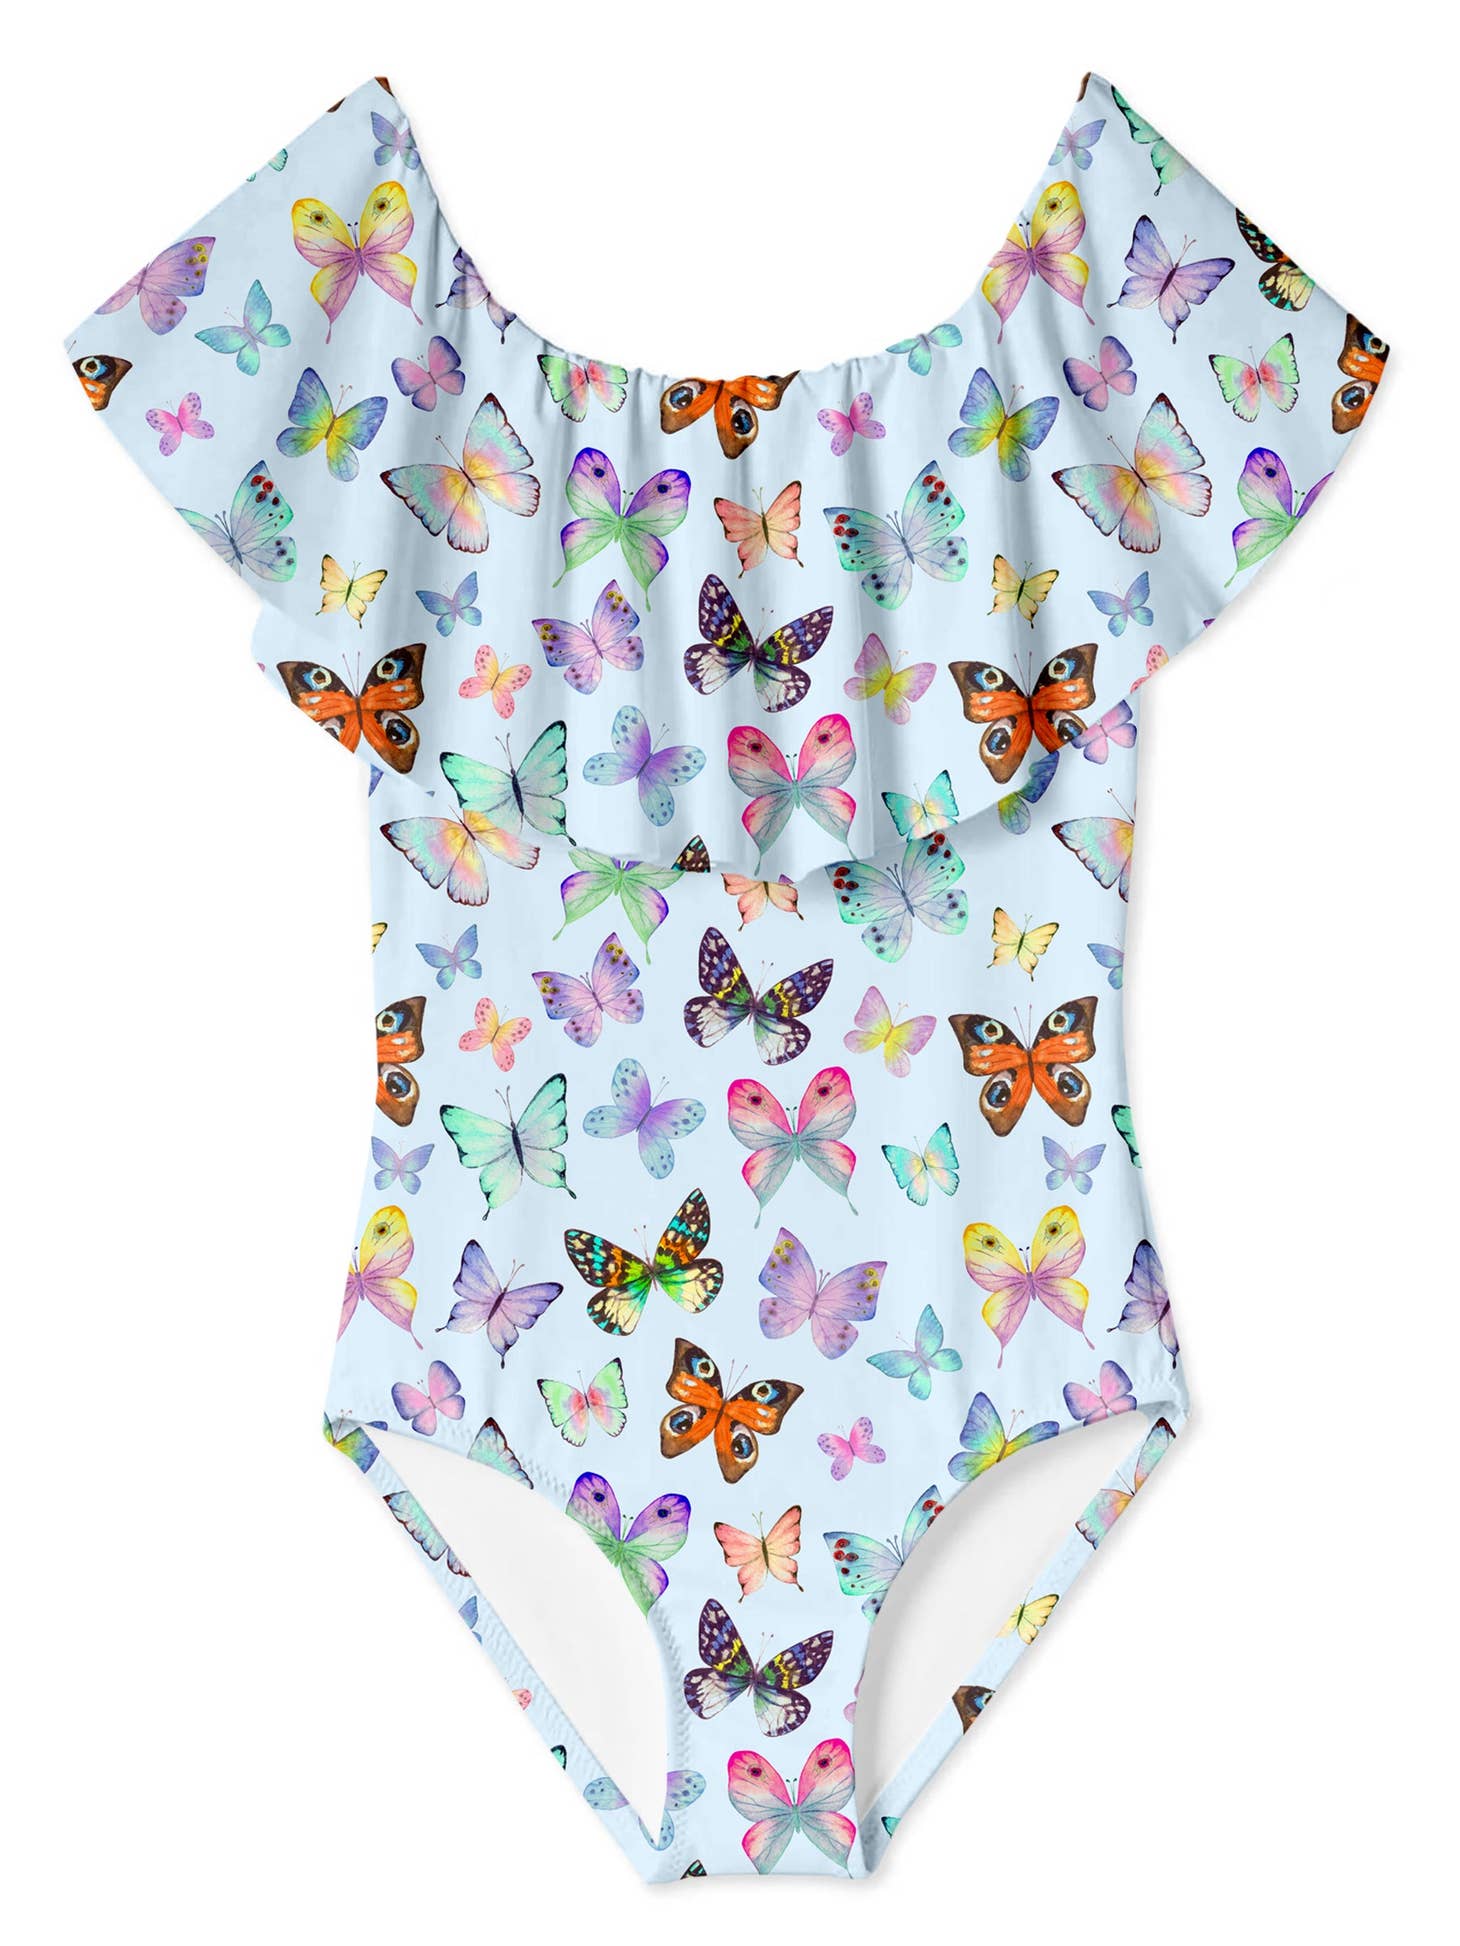 More Butterflies Draped Swimsuit For Girls